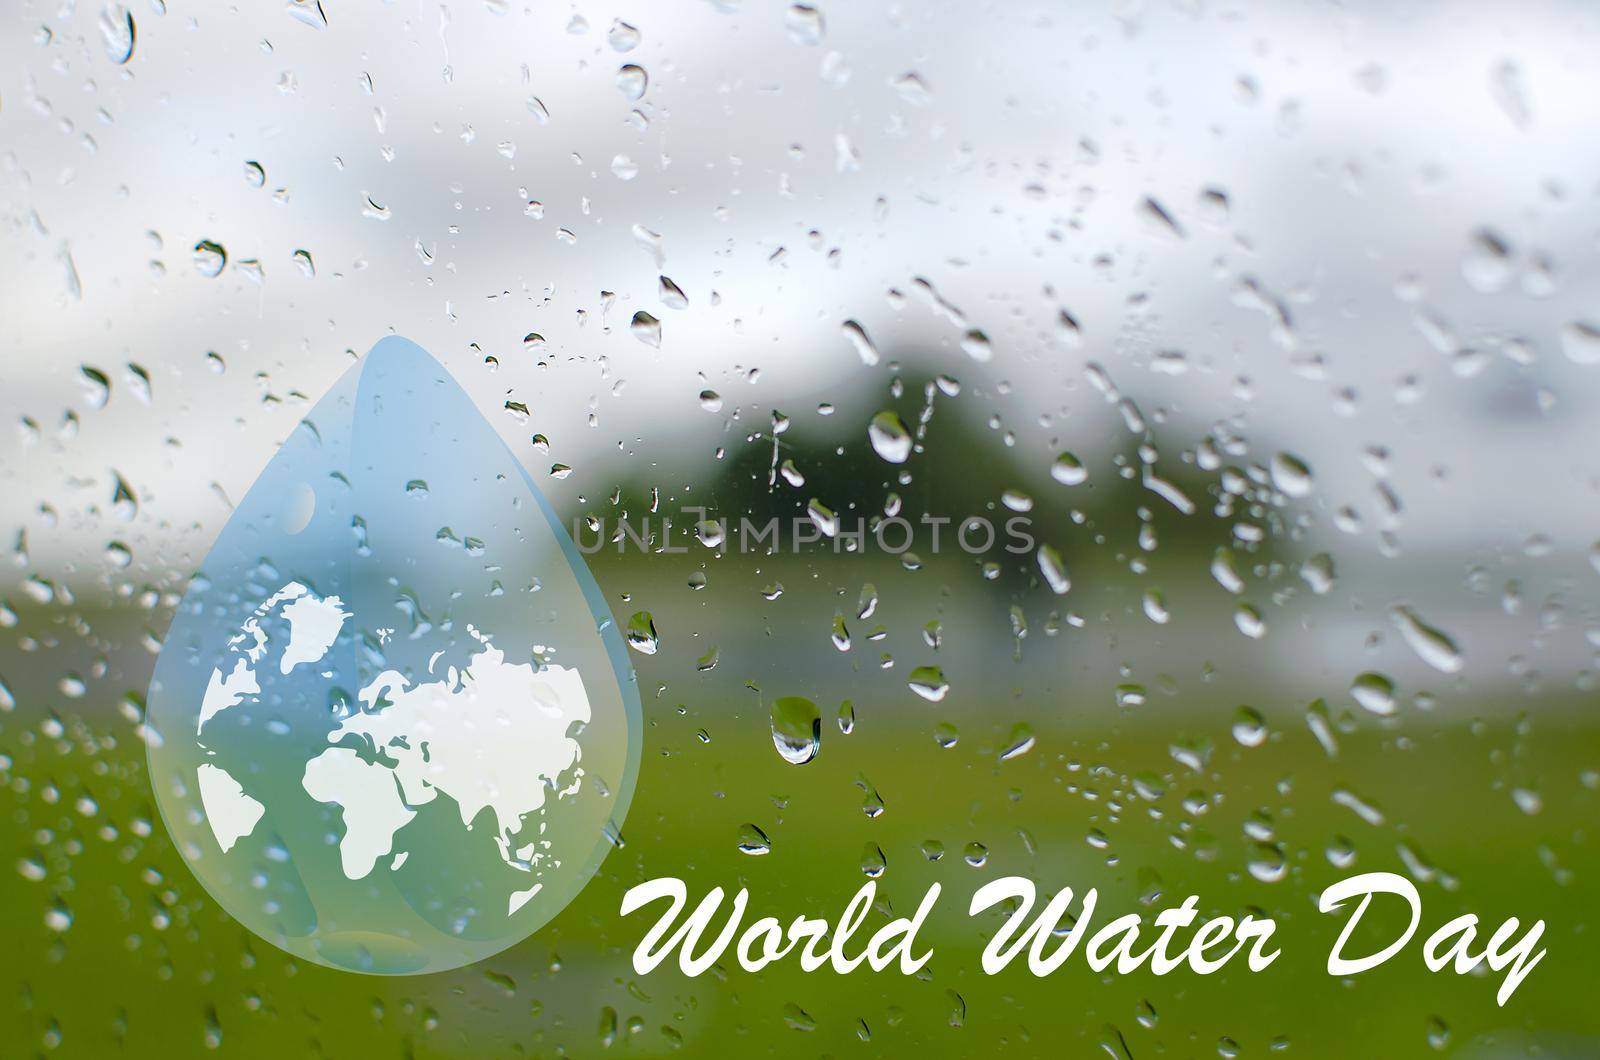 Earth planet in waterdrop. Ecology concept. Save water. World water day backdrop, greeting card or poster for campaign save water.